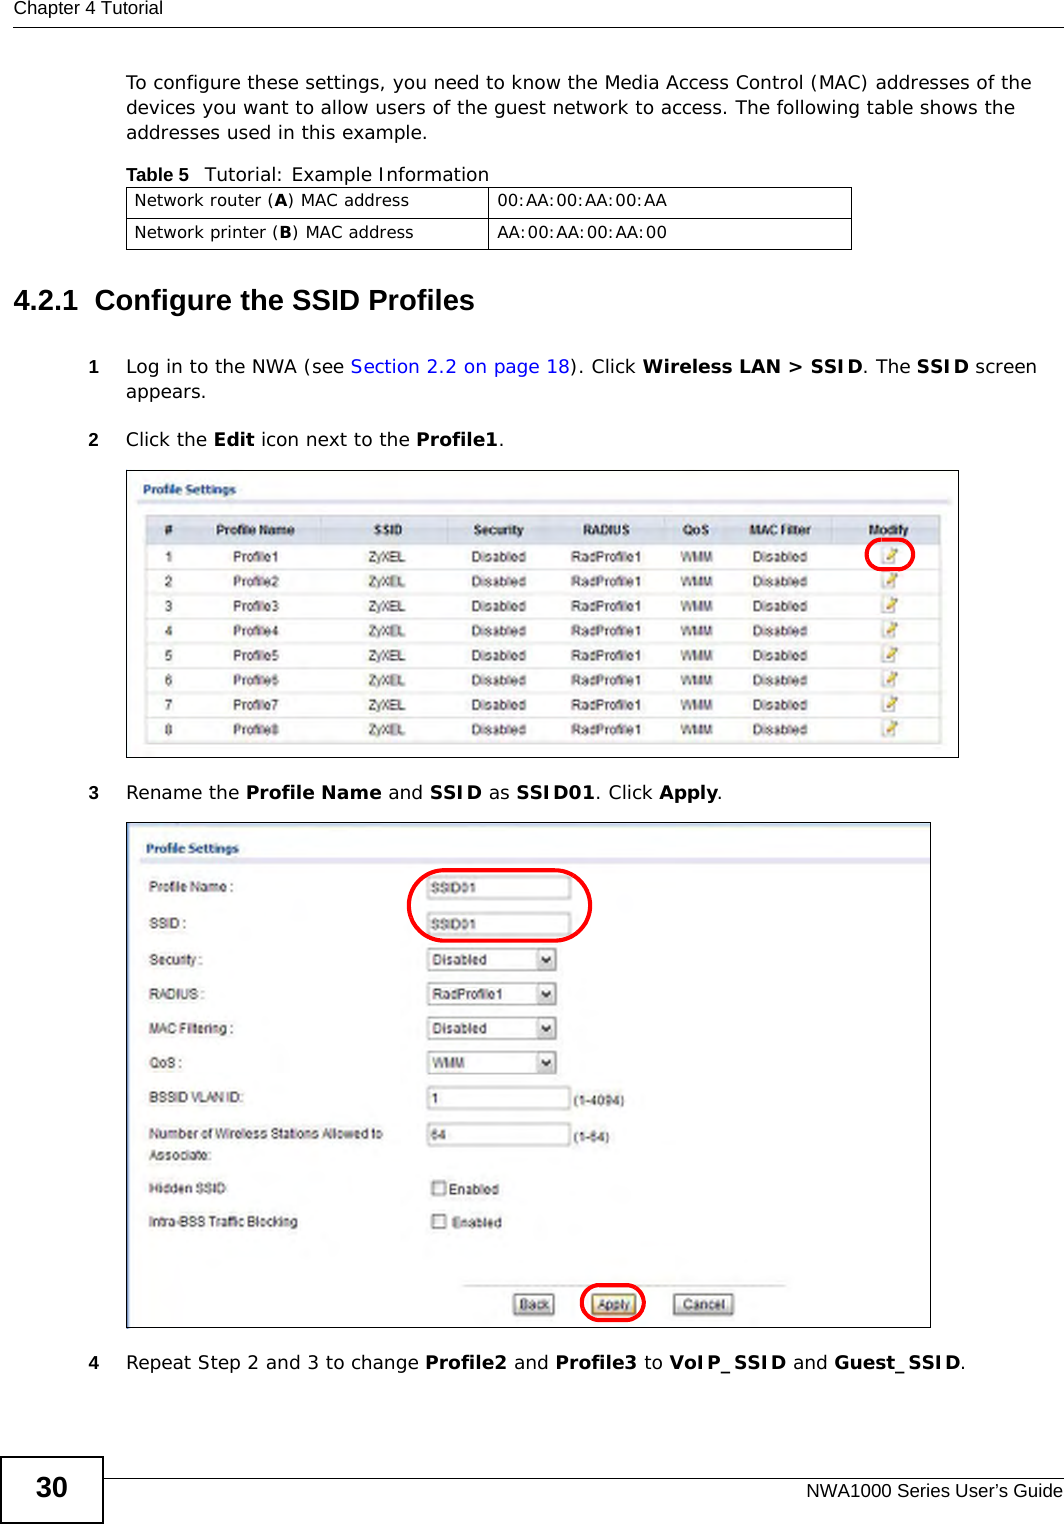 Chapter 4 TutorialNWA1000 Series User’s Guide30To configure these settings, you need to know the Media Access Control (MAC) addresses of the devices you want to allow users of the guest network to access. The following table shows the addresses used in this example. 4.2.1  Configure the SSID Profiles1Log in to the NWA (see Section 2.2 on page 18). Click Wireless LAN &gt; SSID. The SSID screen appears.2Click the Edit icon next to the Profile1.  3Rename the Profile Name and SSID as SSID01. Click Apply. 4Repeat Step 2 and 3 to change Profile2 and Profile3 to VoIP_SSID and Guest_SSID. Table 5   Tutorial: Example InformationNetwork router (A) MAC address 00:AA:00:AA:00:AANetwork printer (B) MAC address AA:00:AA:00:AA:00